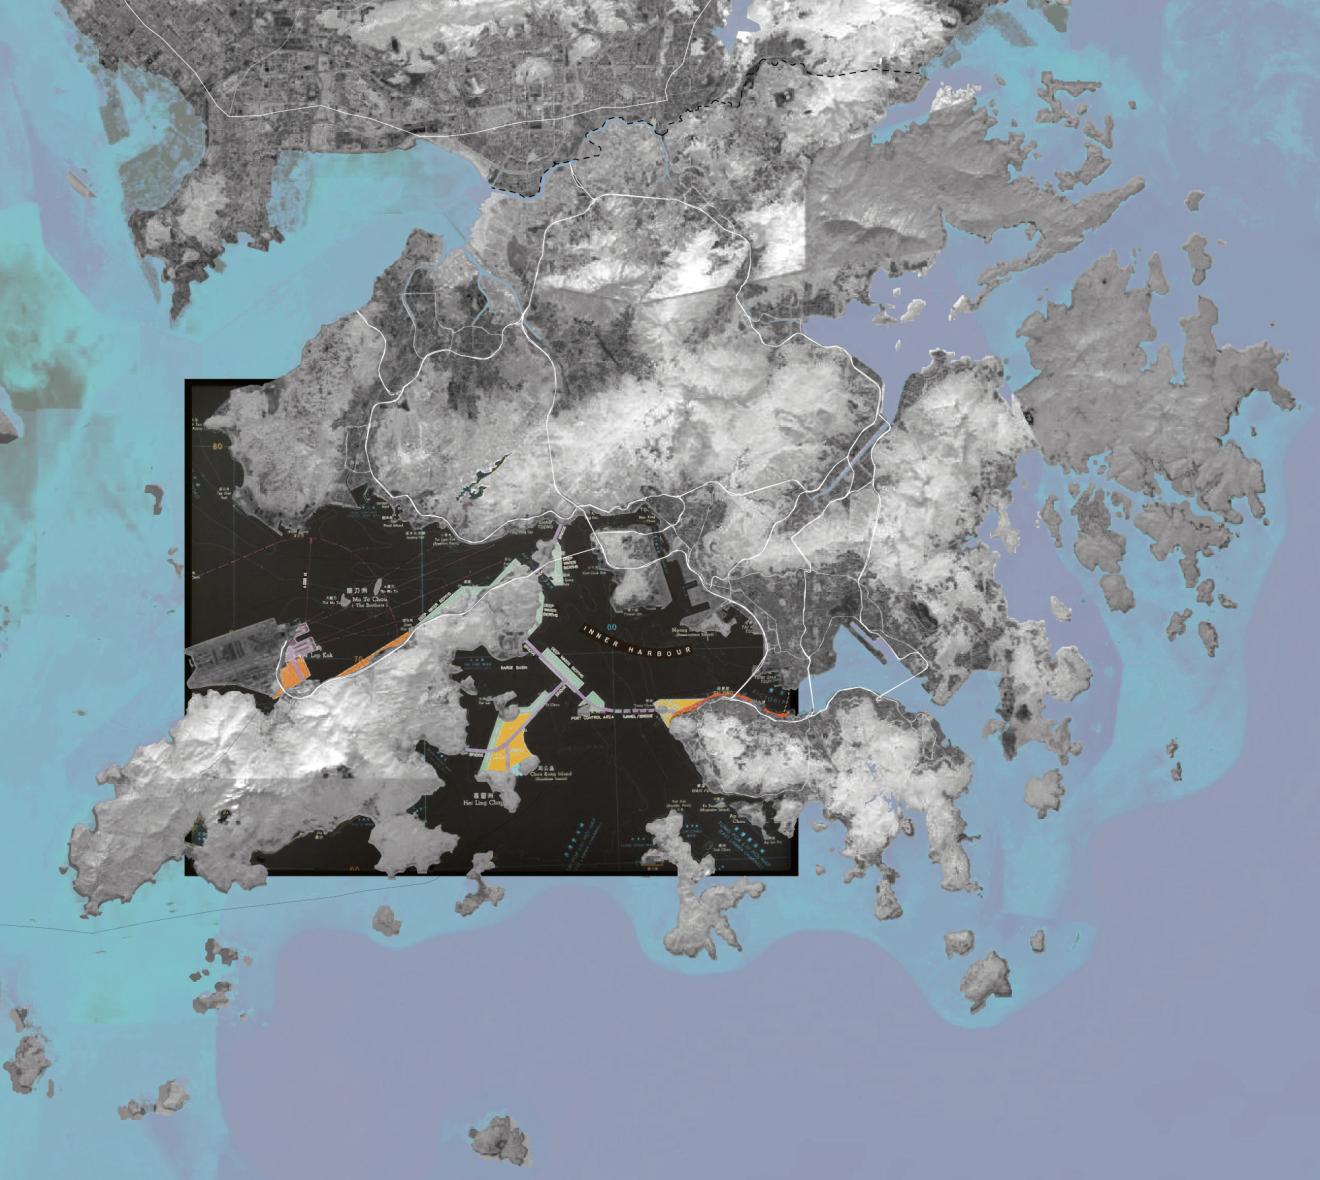 DAB Staff Project: Hong Kong’s Artificial Anti-Archipelago and the Unnaturing of the Natural, by Andrew Toland